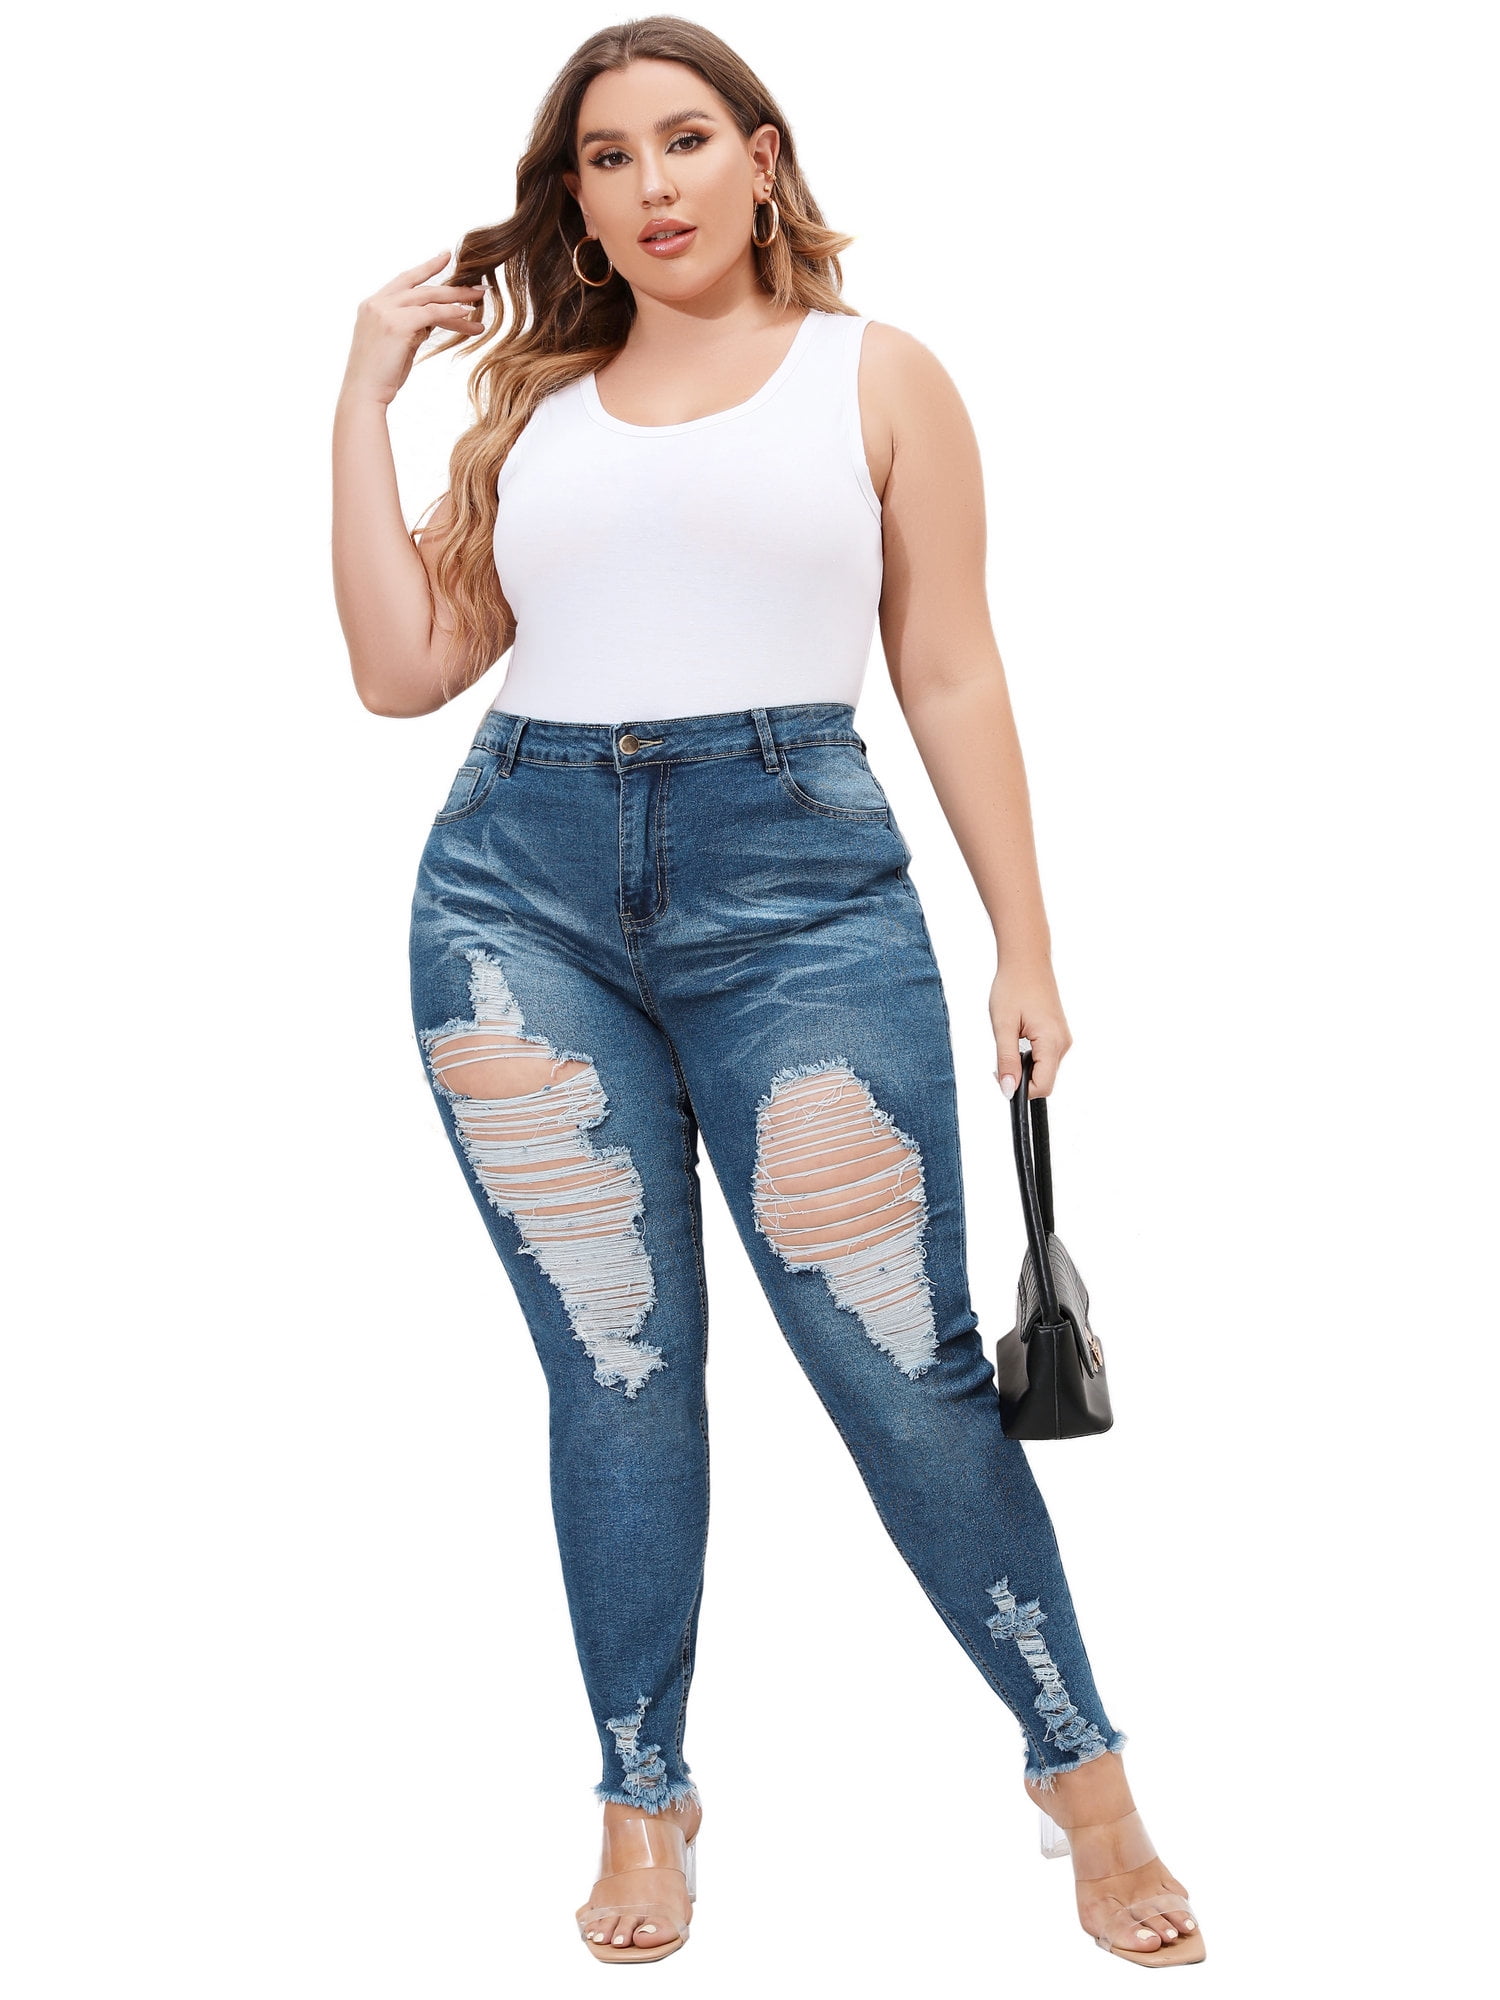 Enwejyy Womens Plus Size Bagi Boyfriend Curve Destructed Ripped Jeans